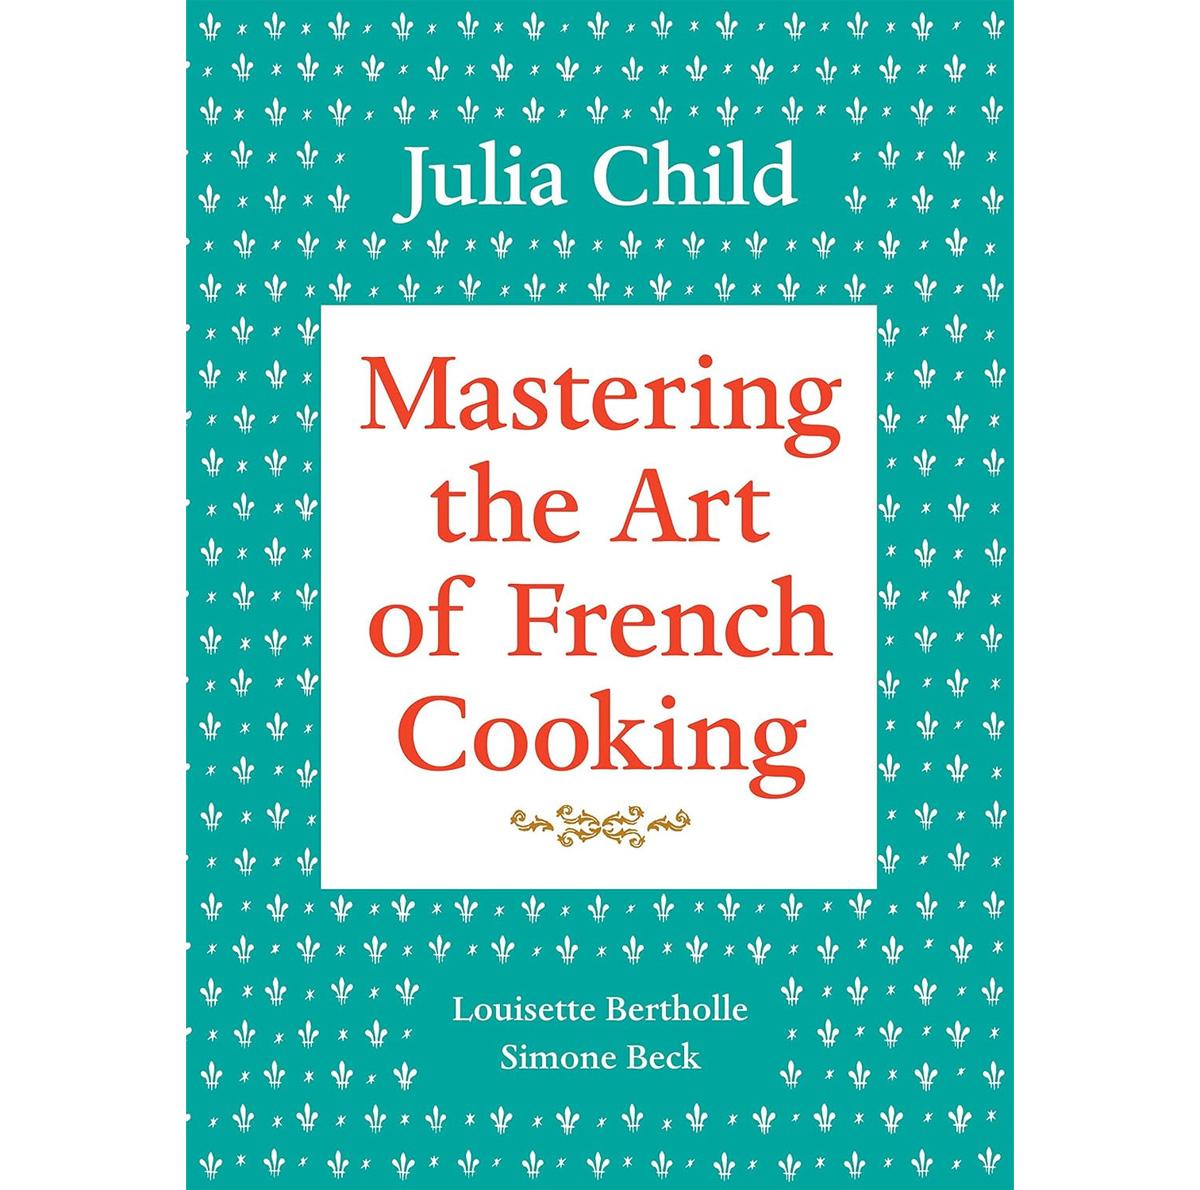 Mastering the Art of French Cooking Volume 1 Cookbook eBook for $1.99